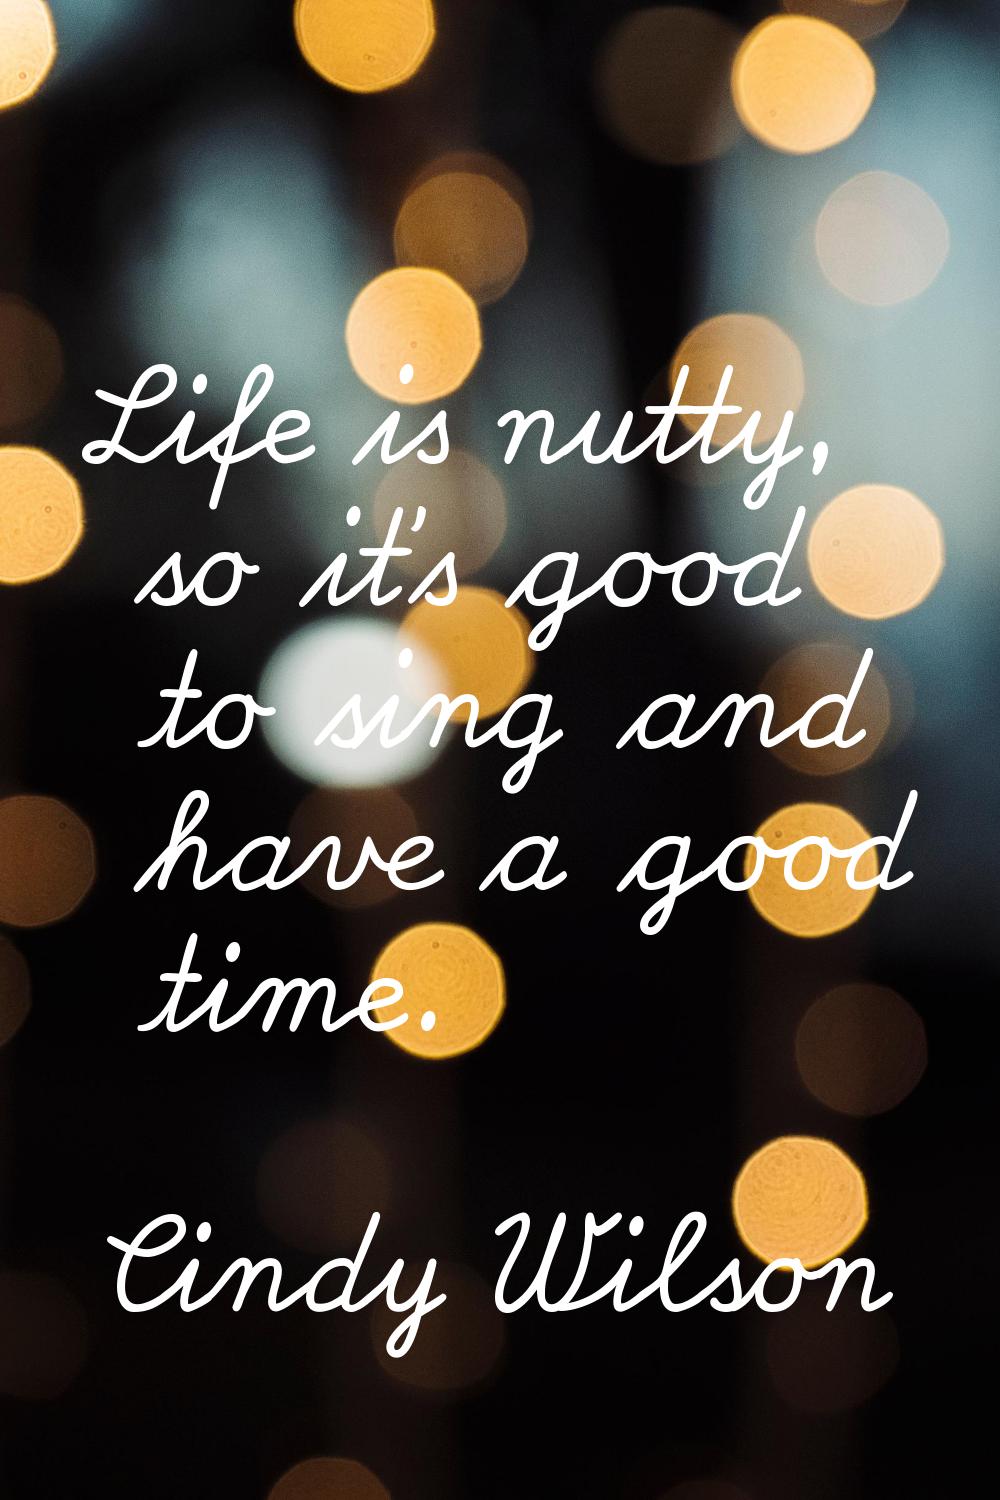 Life is nutty, so it's good to sing and have a good time.